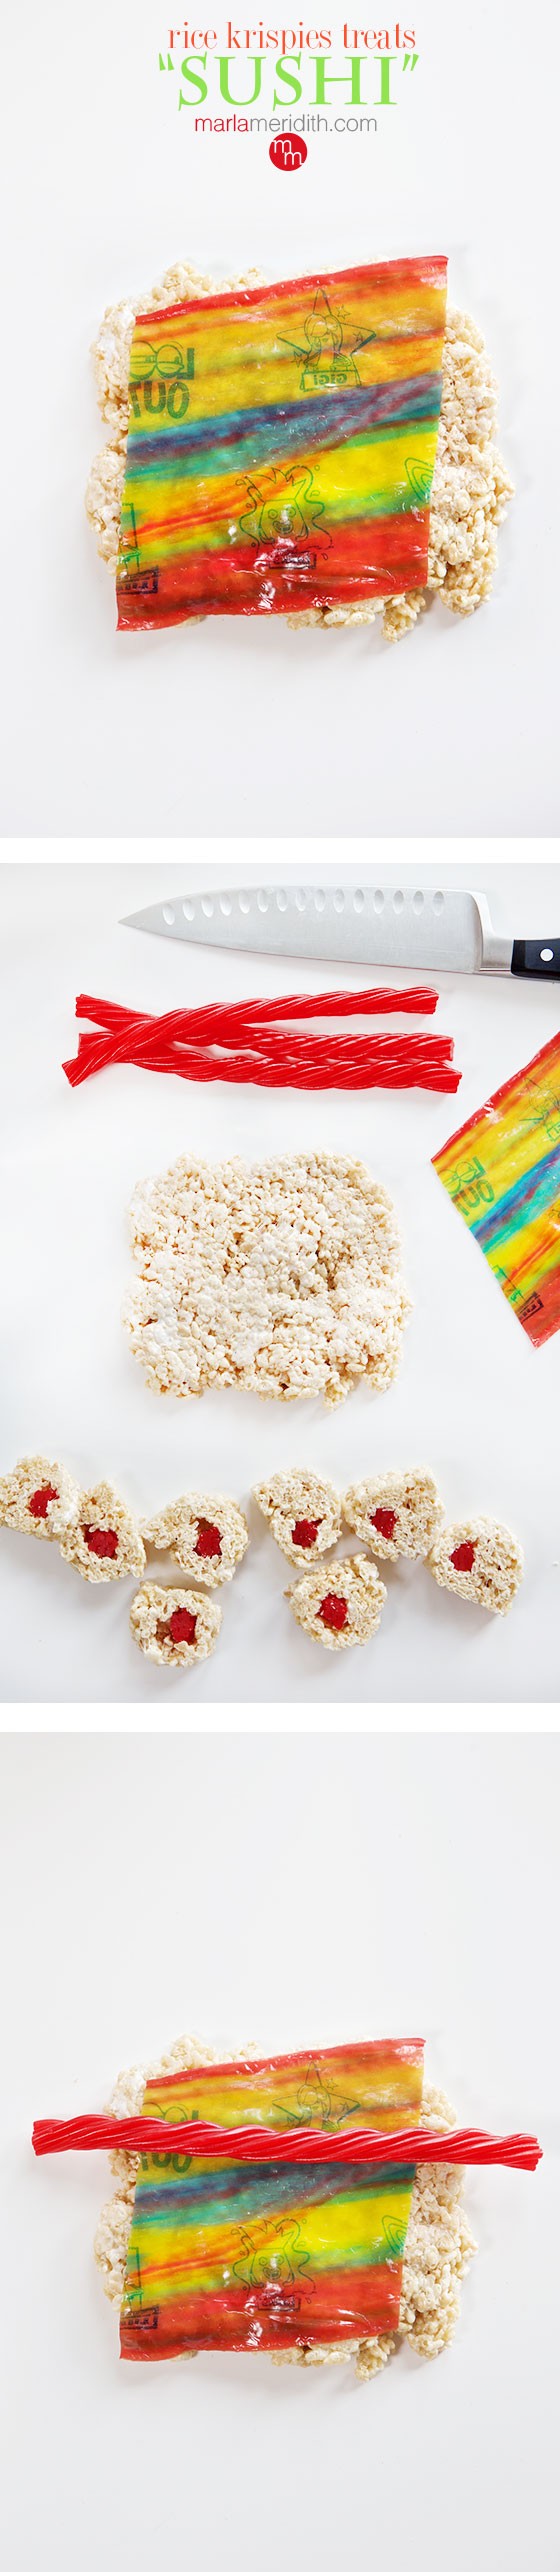 The most creative Rice Krispies Treats you can ever create! MarlaMeridith.com ( @marlameridith )